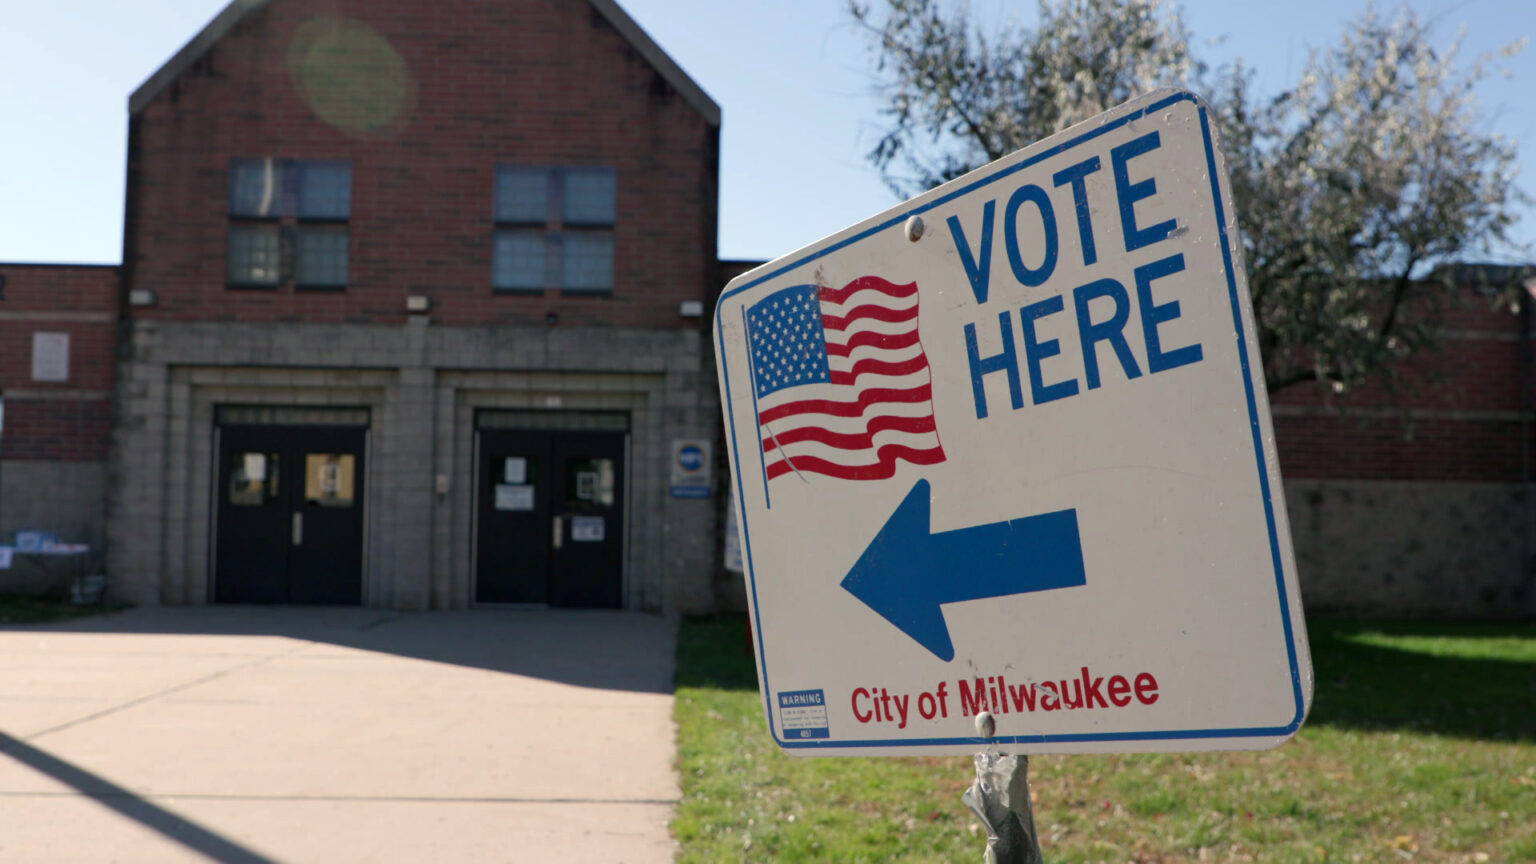 A sign reading Vote Here and City of Milwaukee with a U.S. flag graphic and an arrow is placed in front of a masonry and brick building with two sets of double doors.